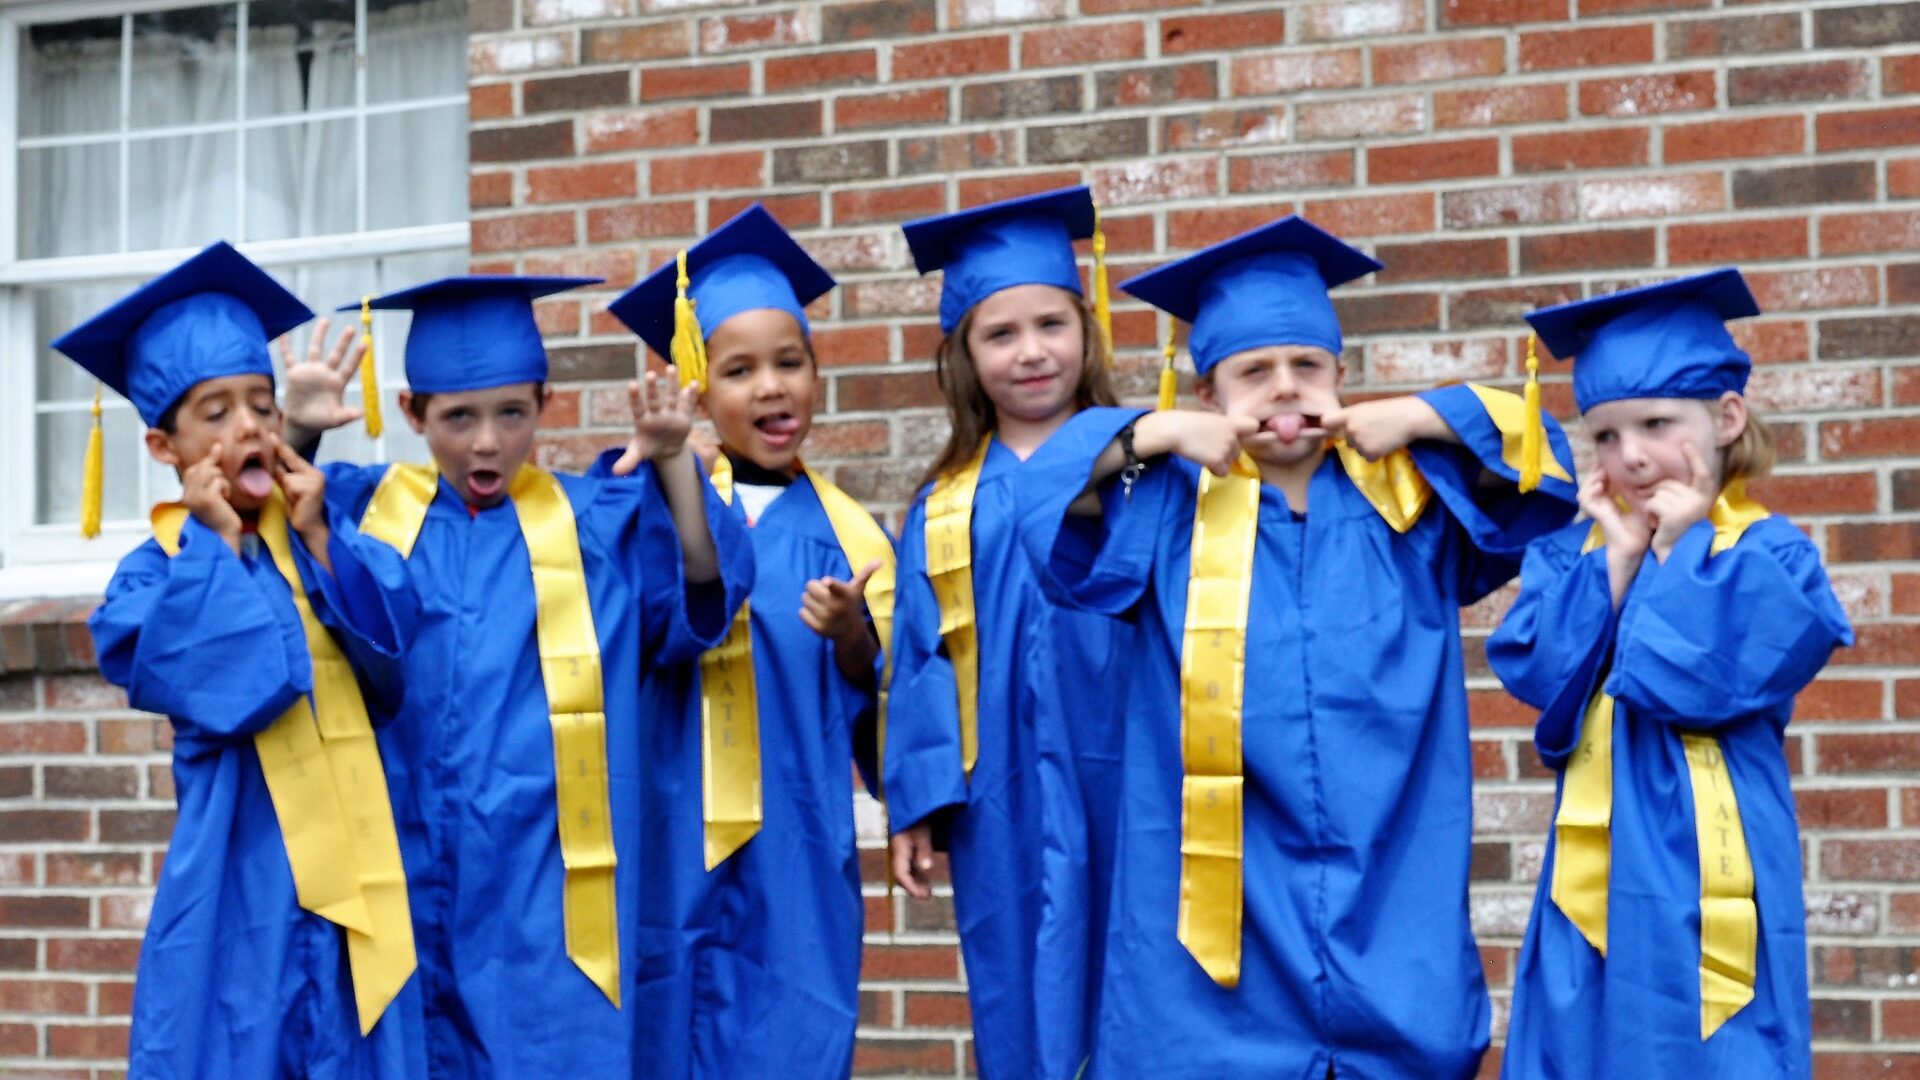 Kids wearing blue graduation caps and gowns